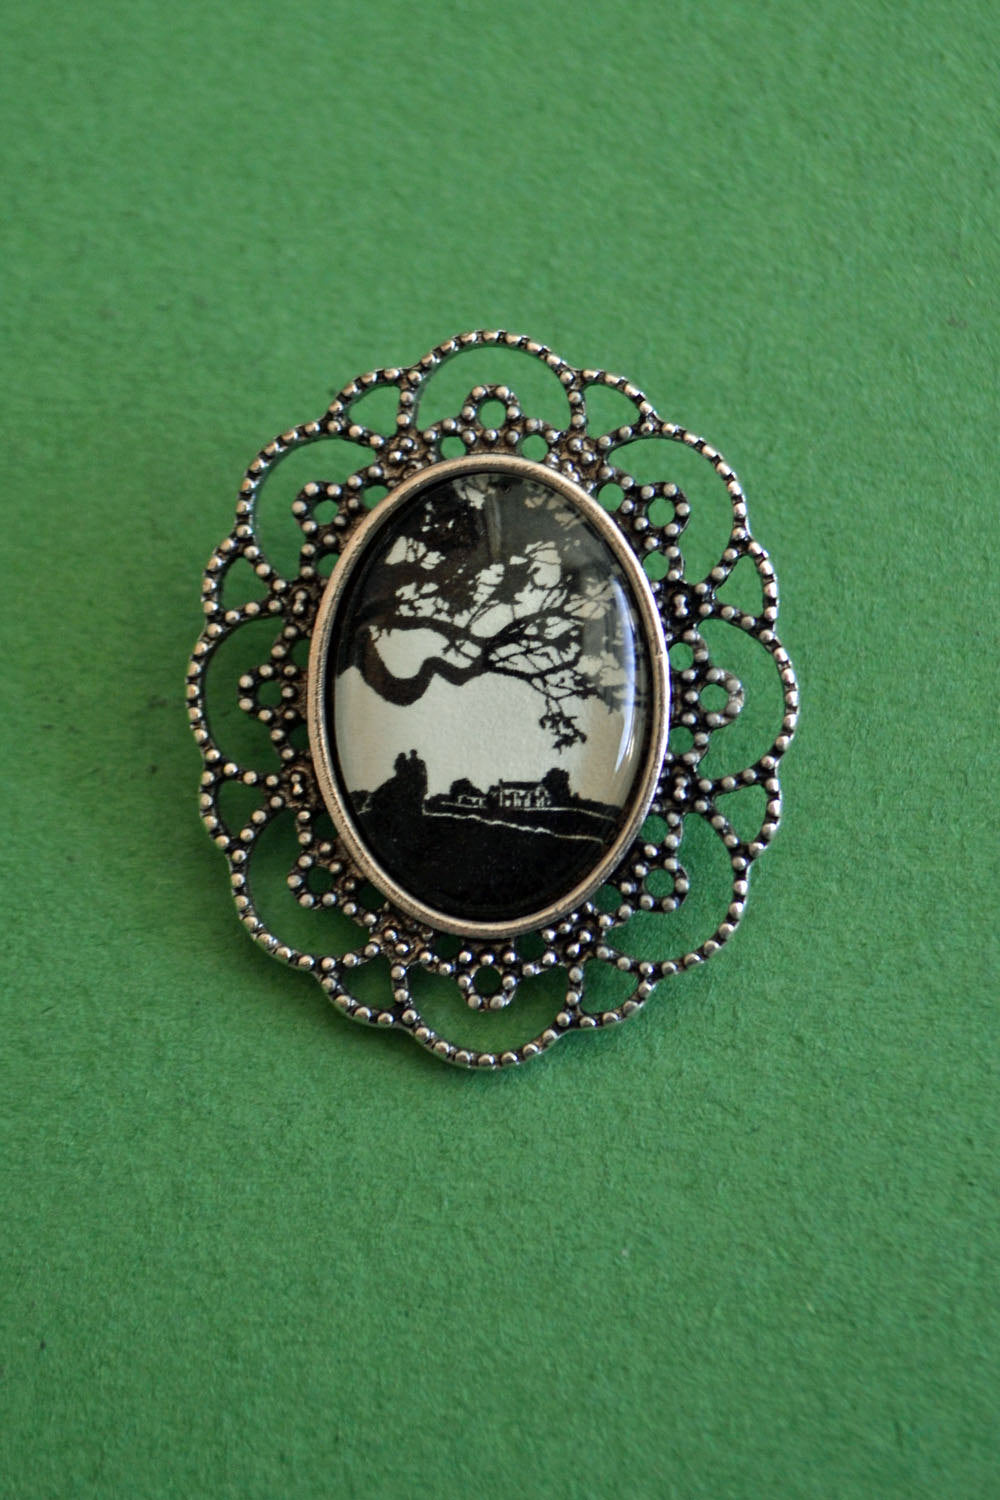 GONE WITH the WIND Brooch - Silhouette Jewelry